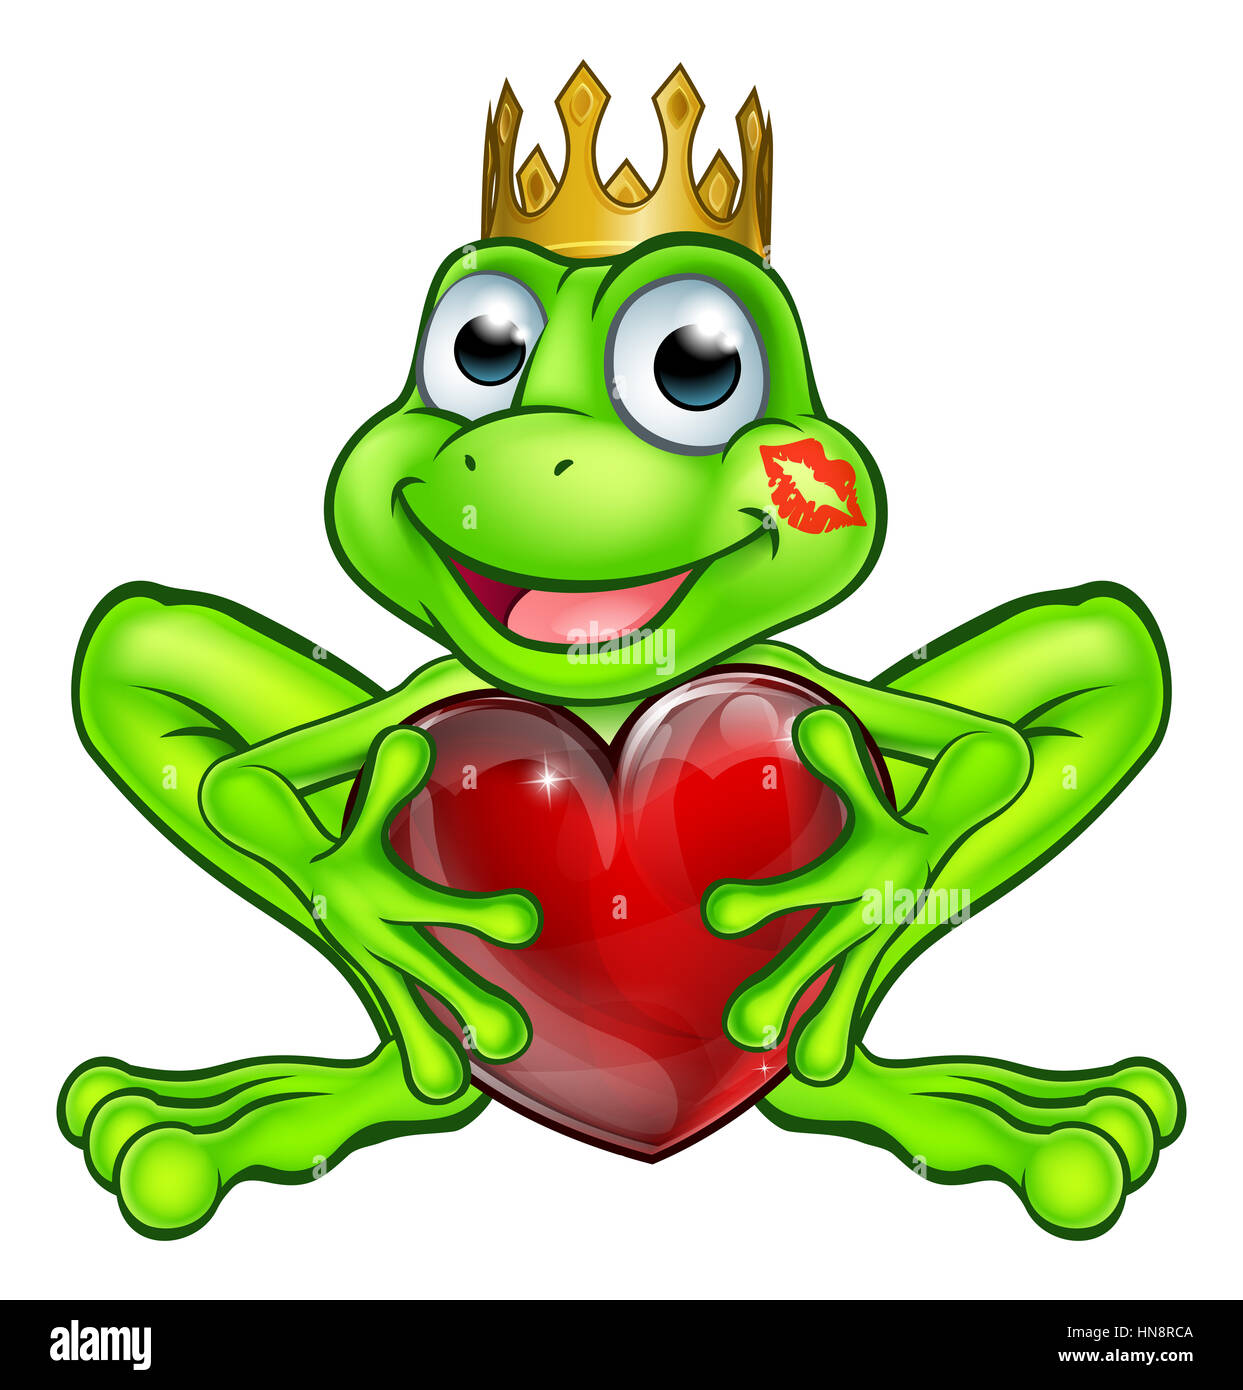 Cartoon frog prince fairy tale mascot character weringa golden crown and holding a heart shape with a lipstick kiss mark on his face Stock Photo